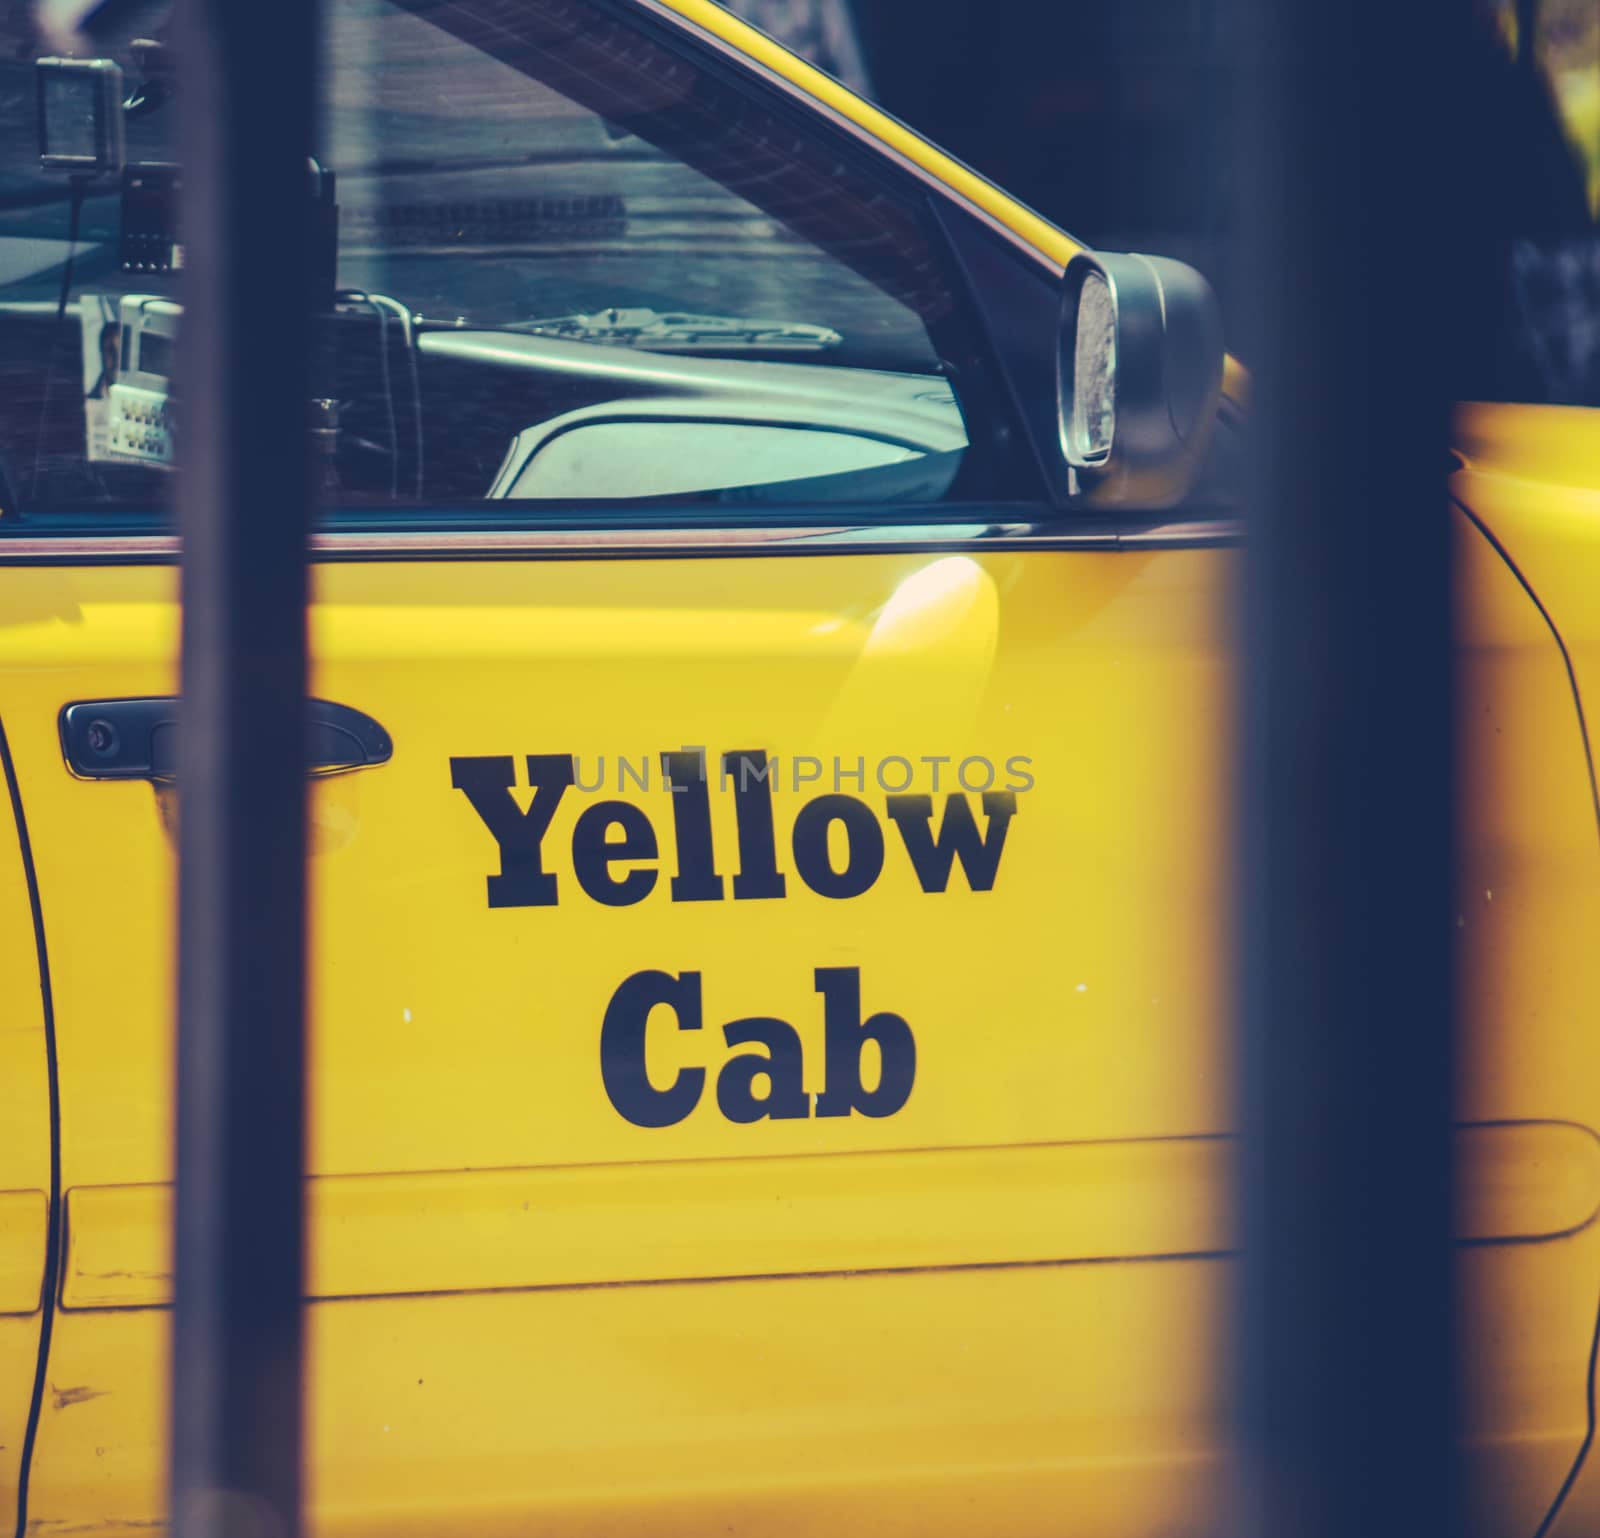 Retro Vintage Style Photo Of Busy Urban Scene Of A Yellow Cab Detail